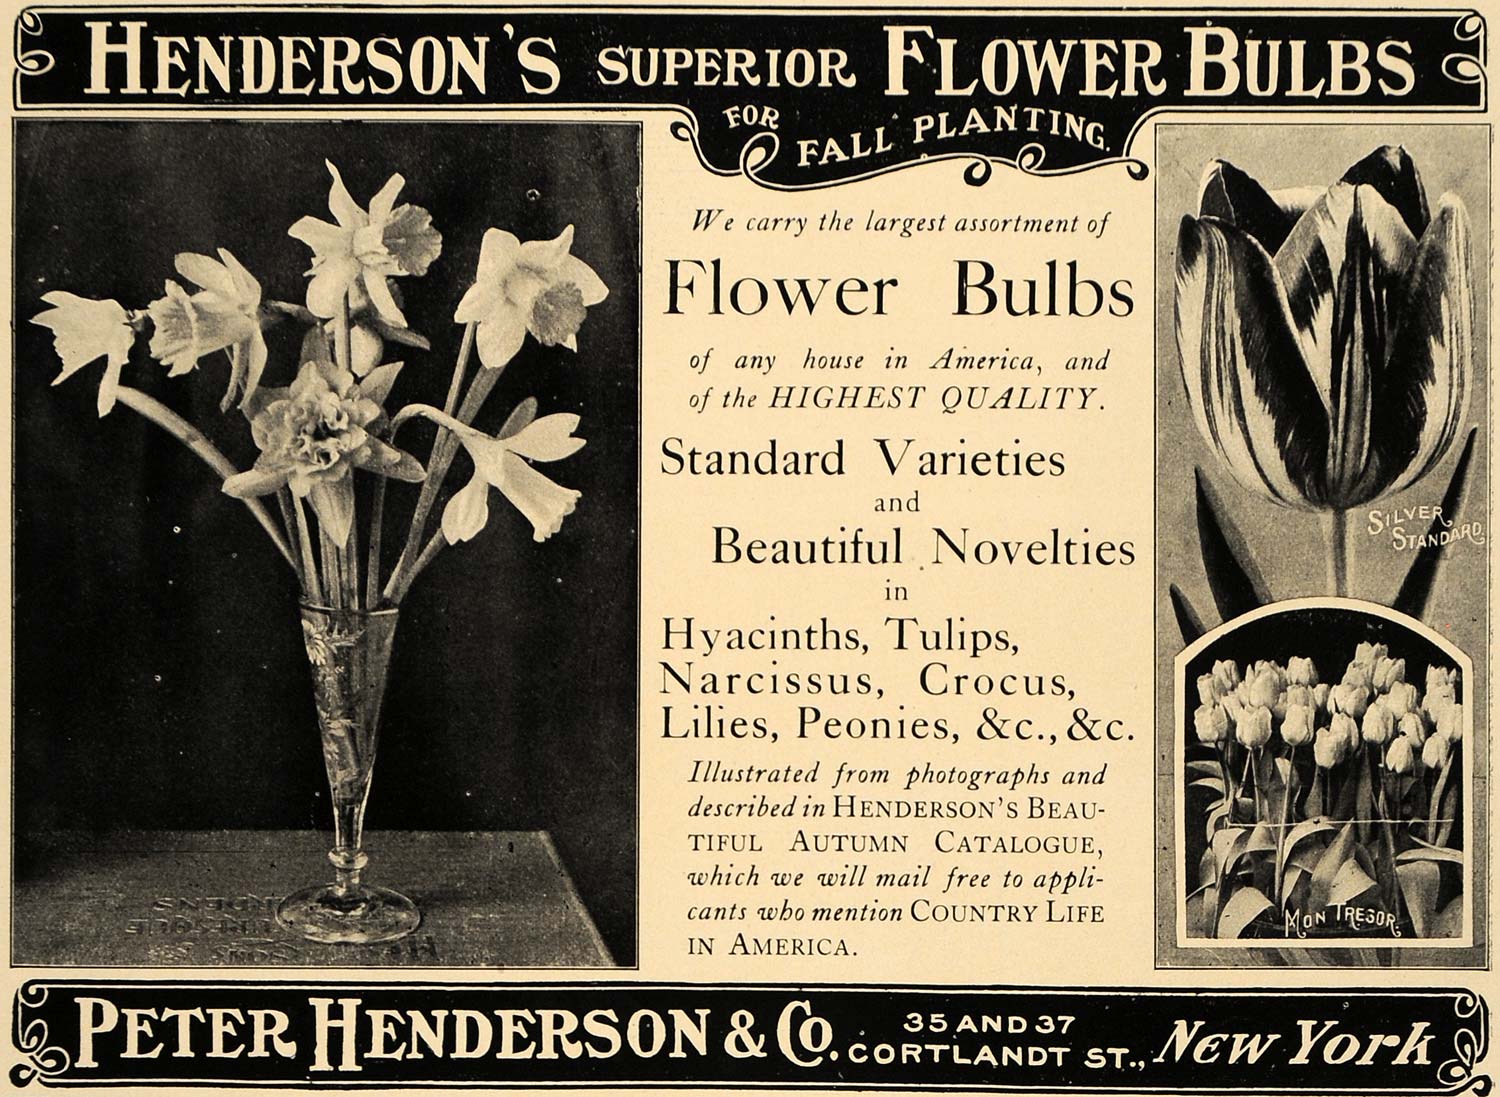 1907 Ad Peter Henderson's Flower Bulbs Tulips Daffodils - ORIGINAL CL9